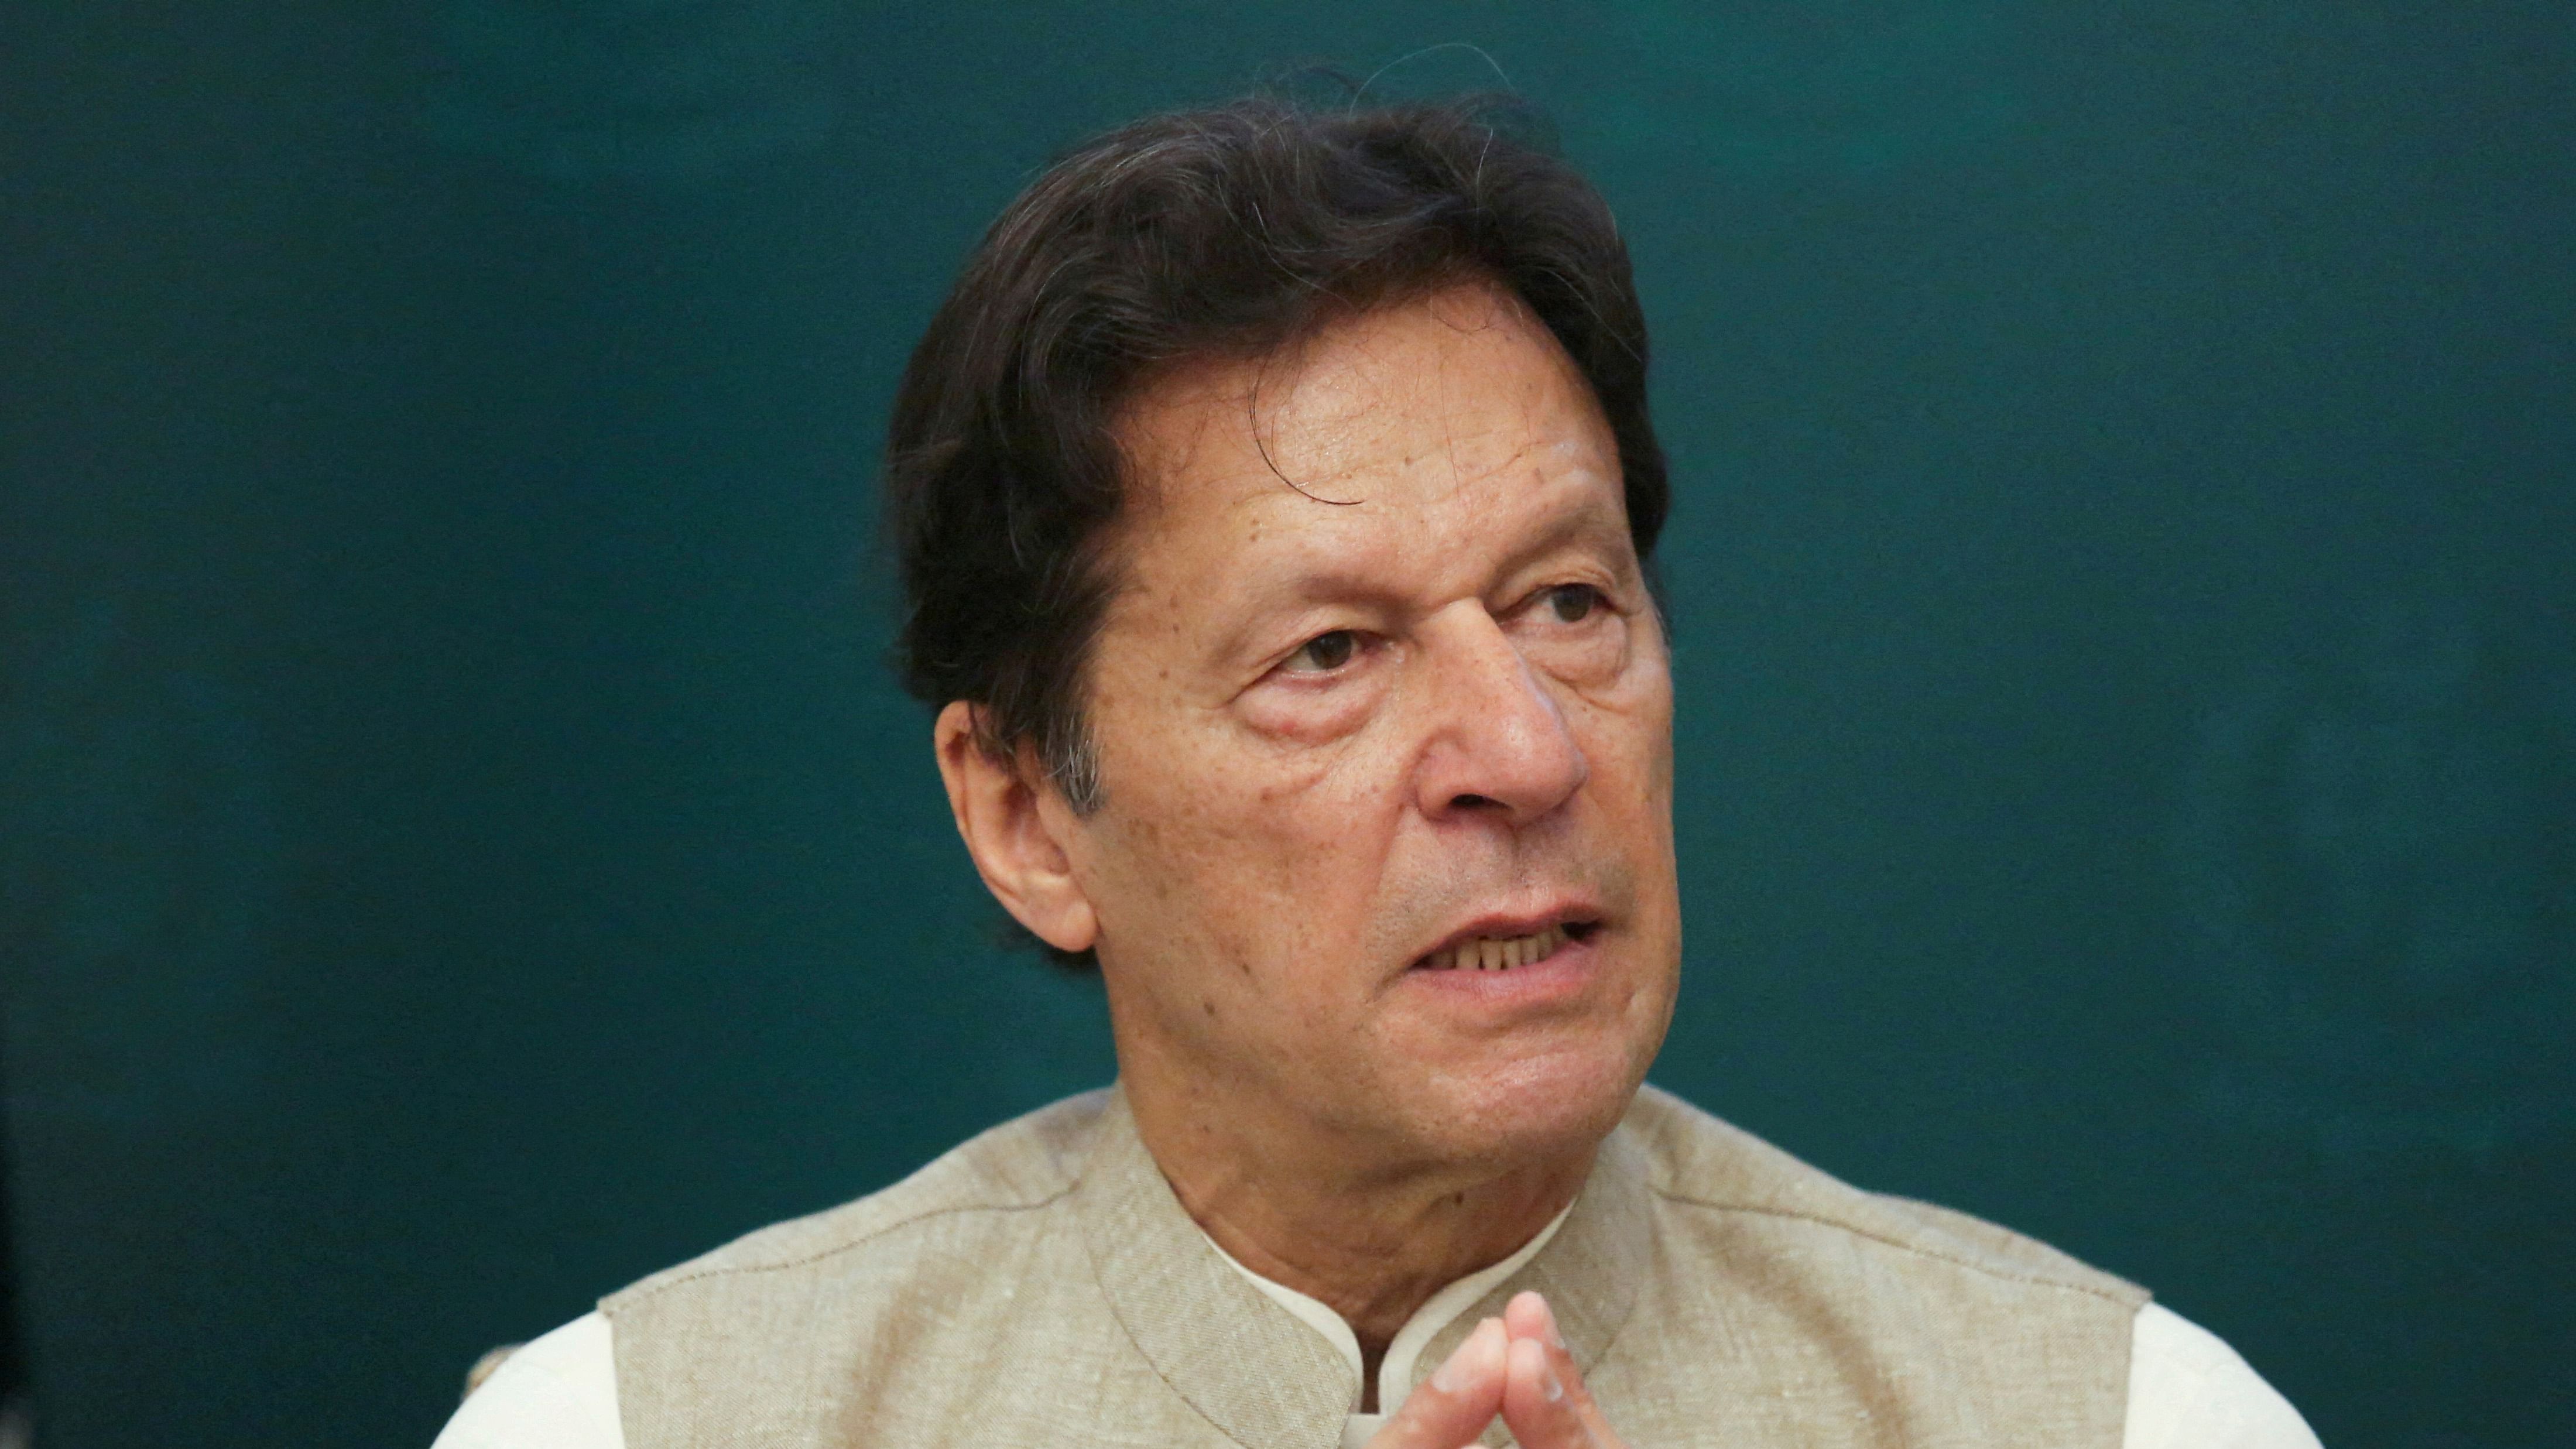 Imran Khan, the cricketer-turned-politician, received the first notice last Wednesday, but he refused to appear before the FIA investigation team, the newspaper said. Credit: Reuters Photo